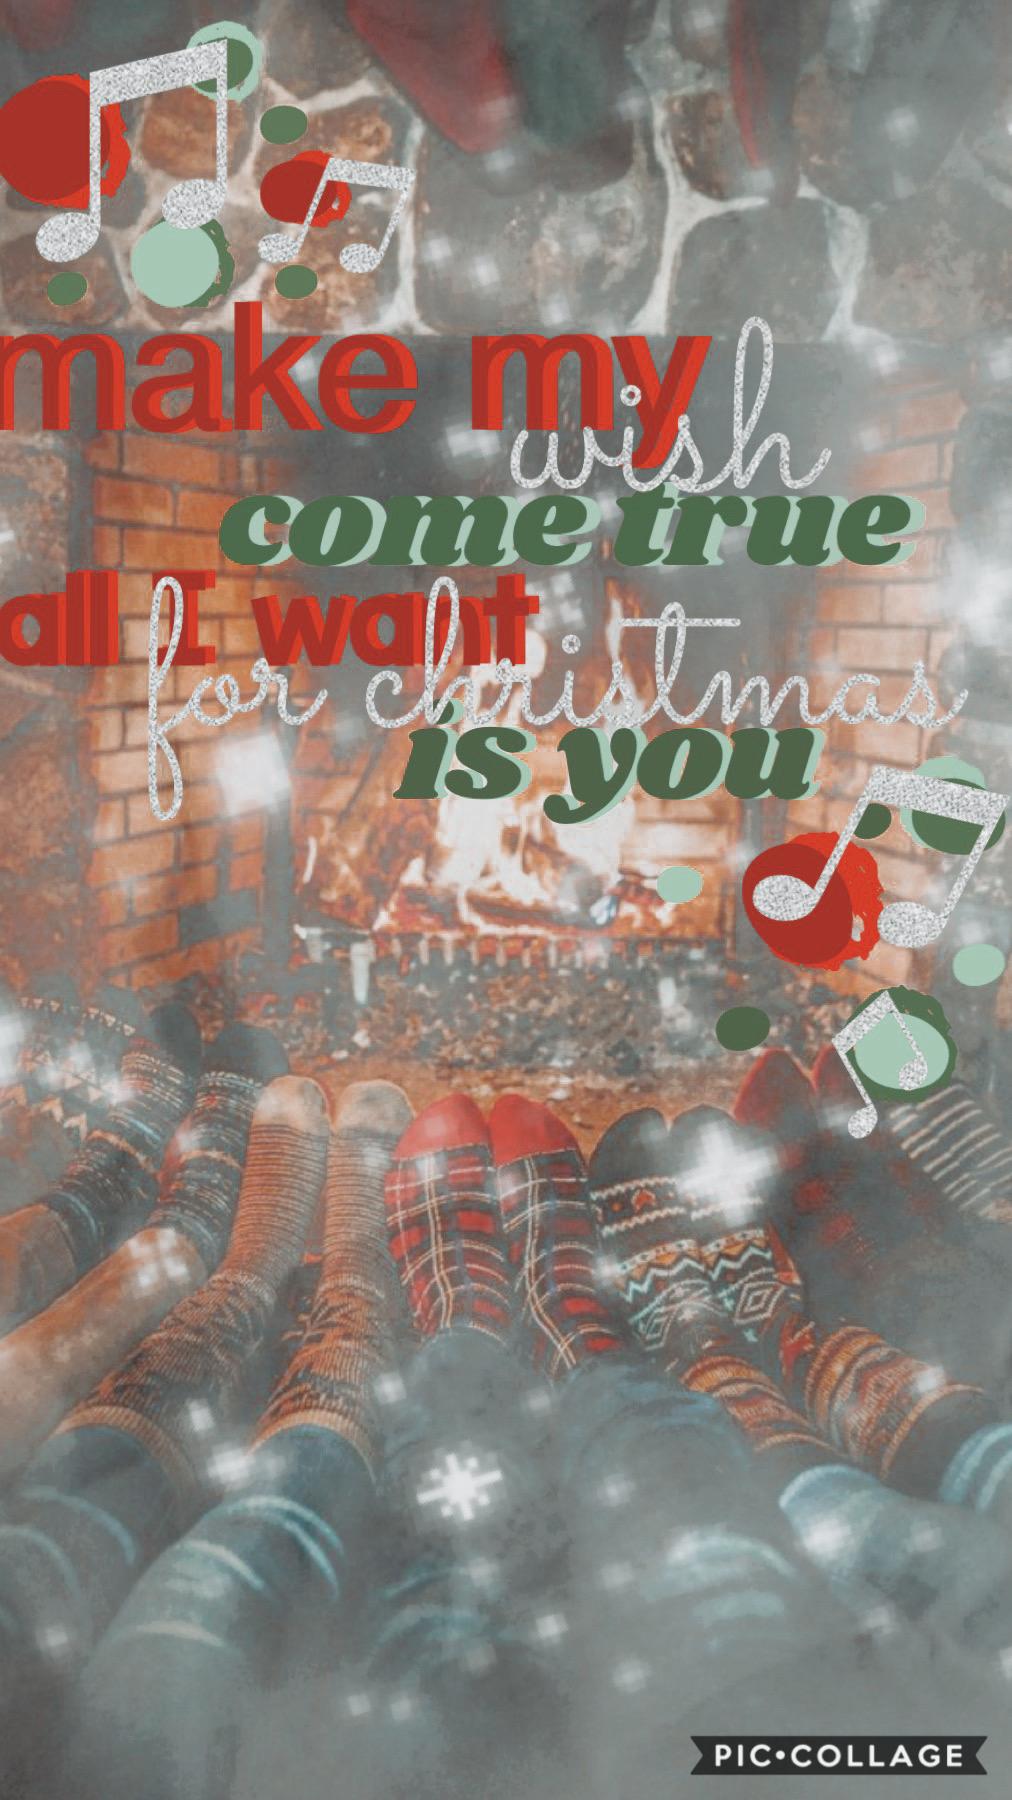 🎄tap🎄
for Livvy-Aesthetics contest!!!!
Also TYSM IM AT 200 FOLLOWERS 🤯 ty ty!! QOTD: would u guys enjoy it if i did a contest for 200? lmk in the comments 